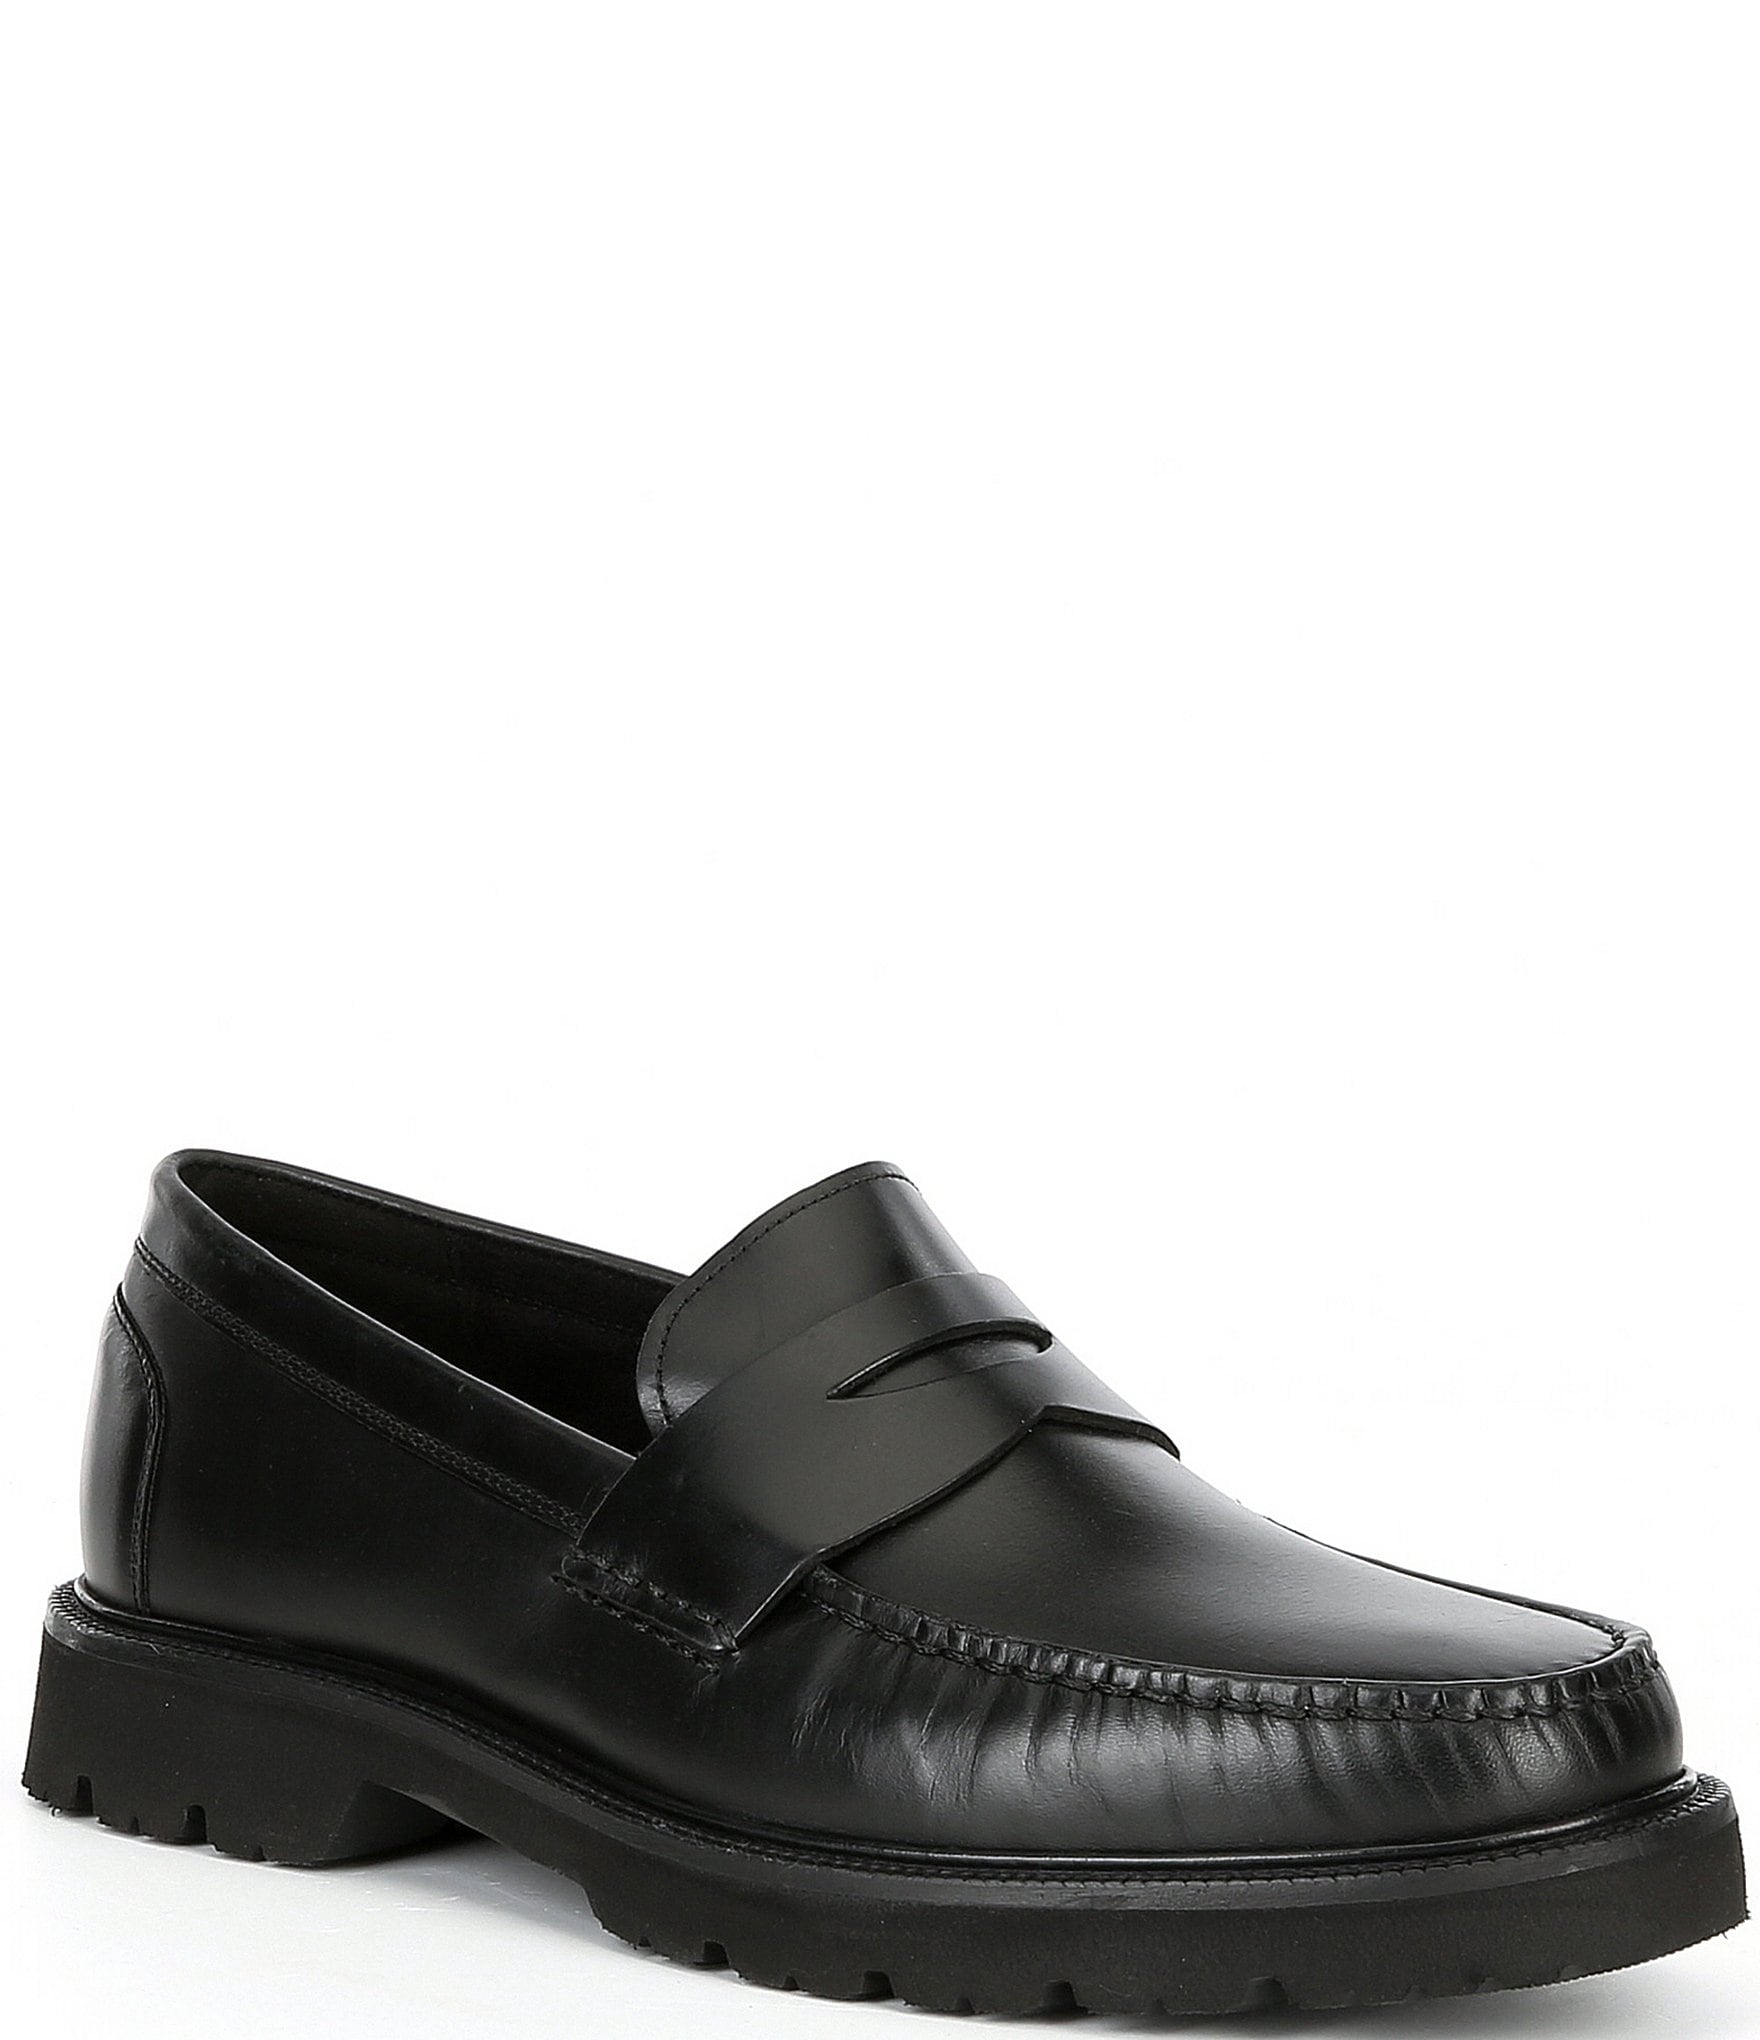 https://dimg.dillards.com/is/image/DillardsZoom/zoom/cole-haan-mens-american-classic-penny-loafers/00000000_zi_9e22c5c7-91cb-4f2a-9414-00a8d974a026.jpg